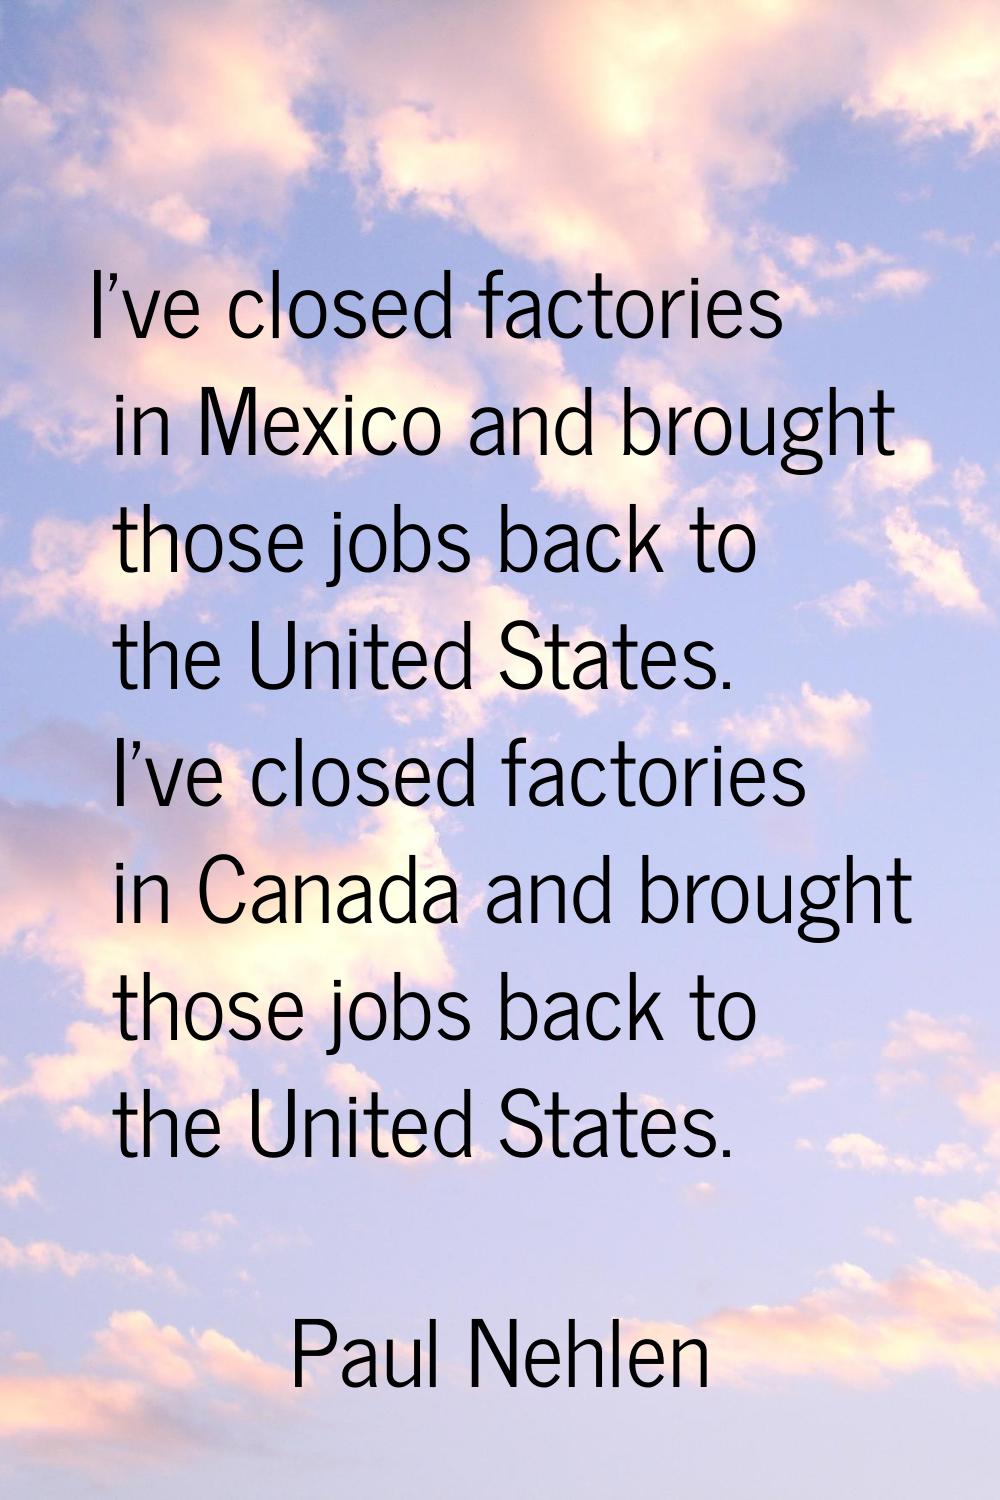 I've closed factories in Mexico and brought those jobs back to the United States. I've closed facto